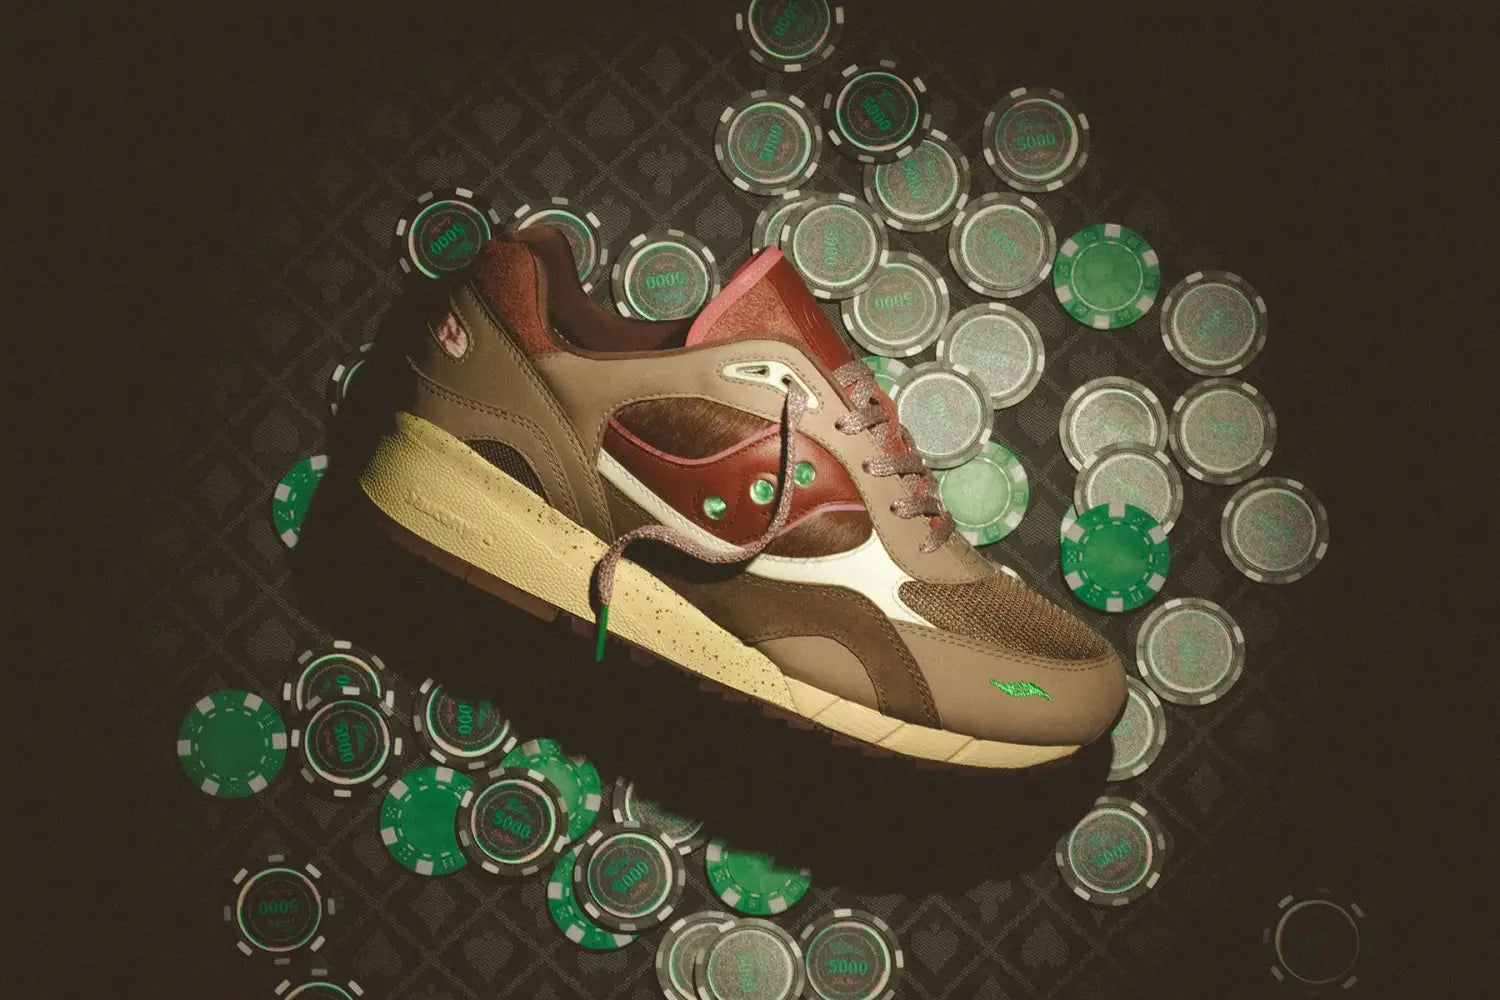 Feature x Saucony: Shadow 6000 ‘Chocolate Chip’ - S70607-1